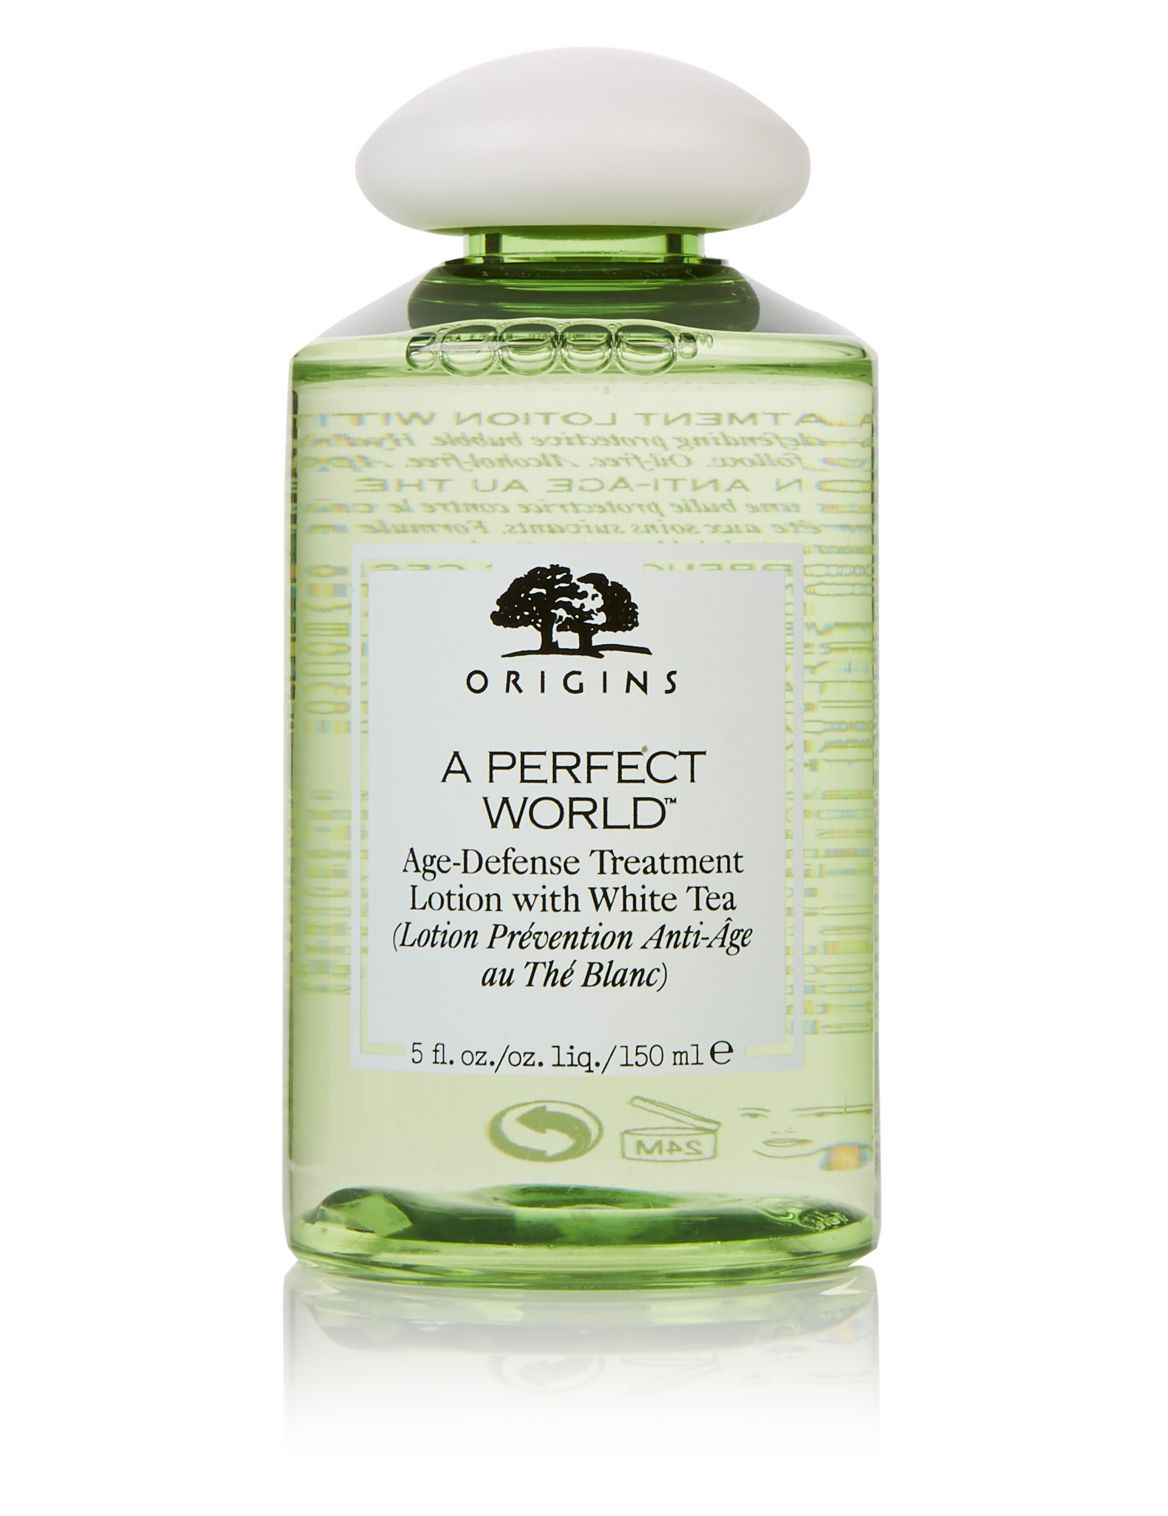 A Perfect World&trade; Age-Defense Treatment Lotion with White Tea 150ml